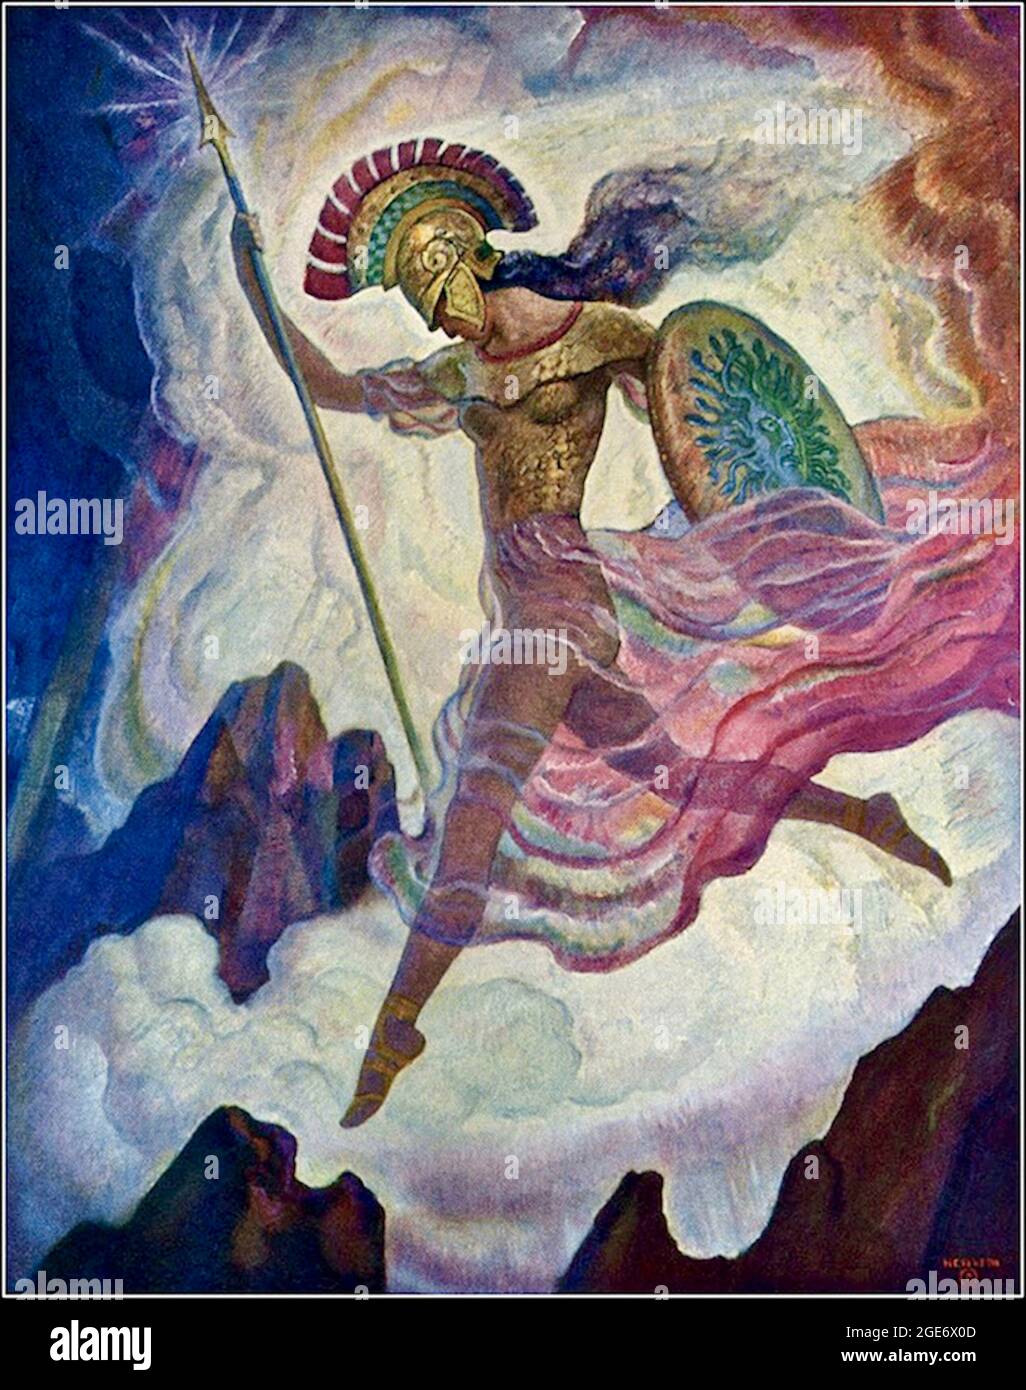 Newell Convers Wyeth ( N C Wyeth) artwork - Goddess of Power - Athena - Spear and shield in hand. Stock Photo